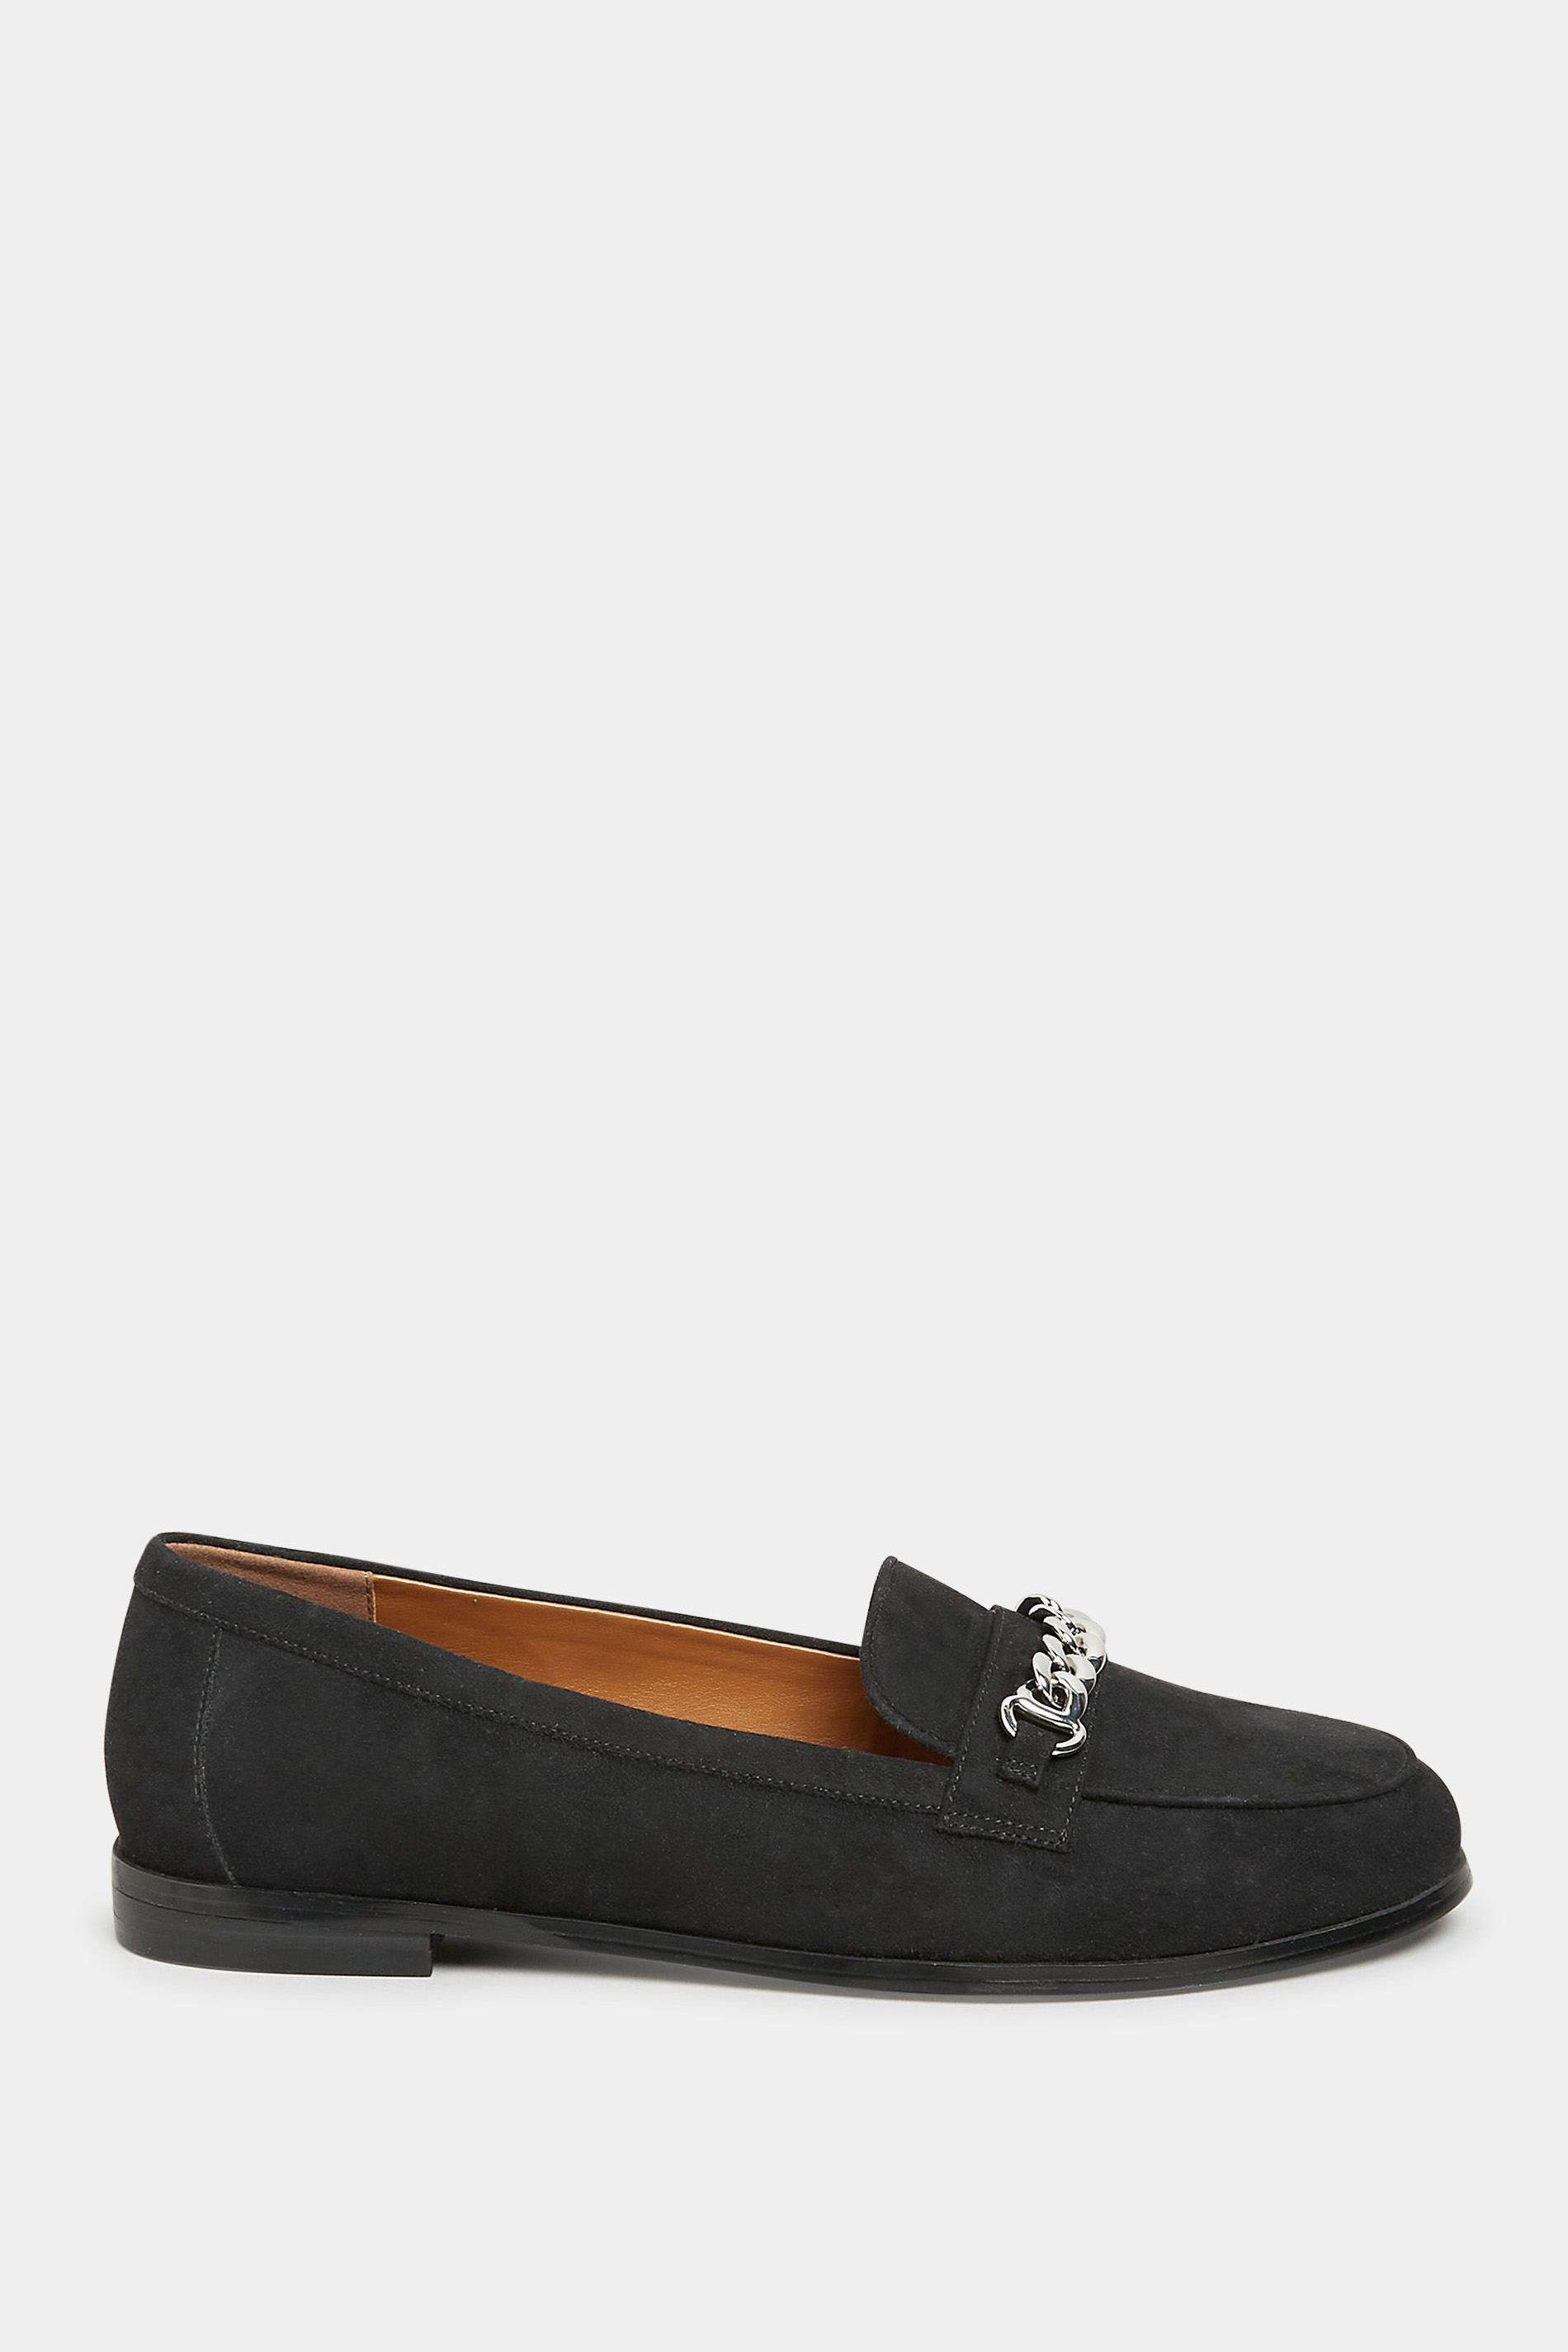 LTS Black Chain Loafers In Standard Fit | Long Tall Sally 3